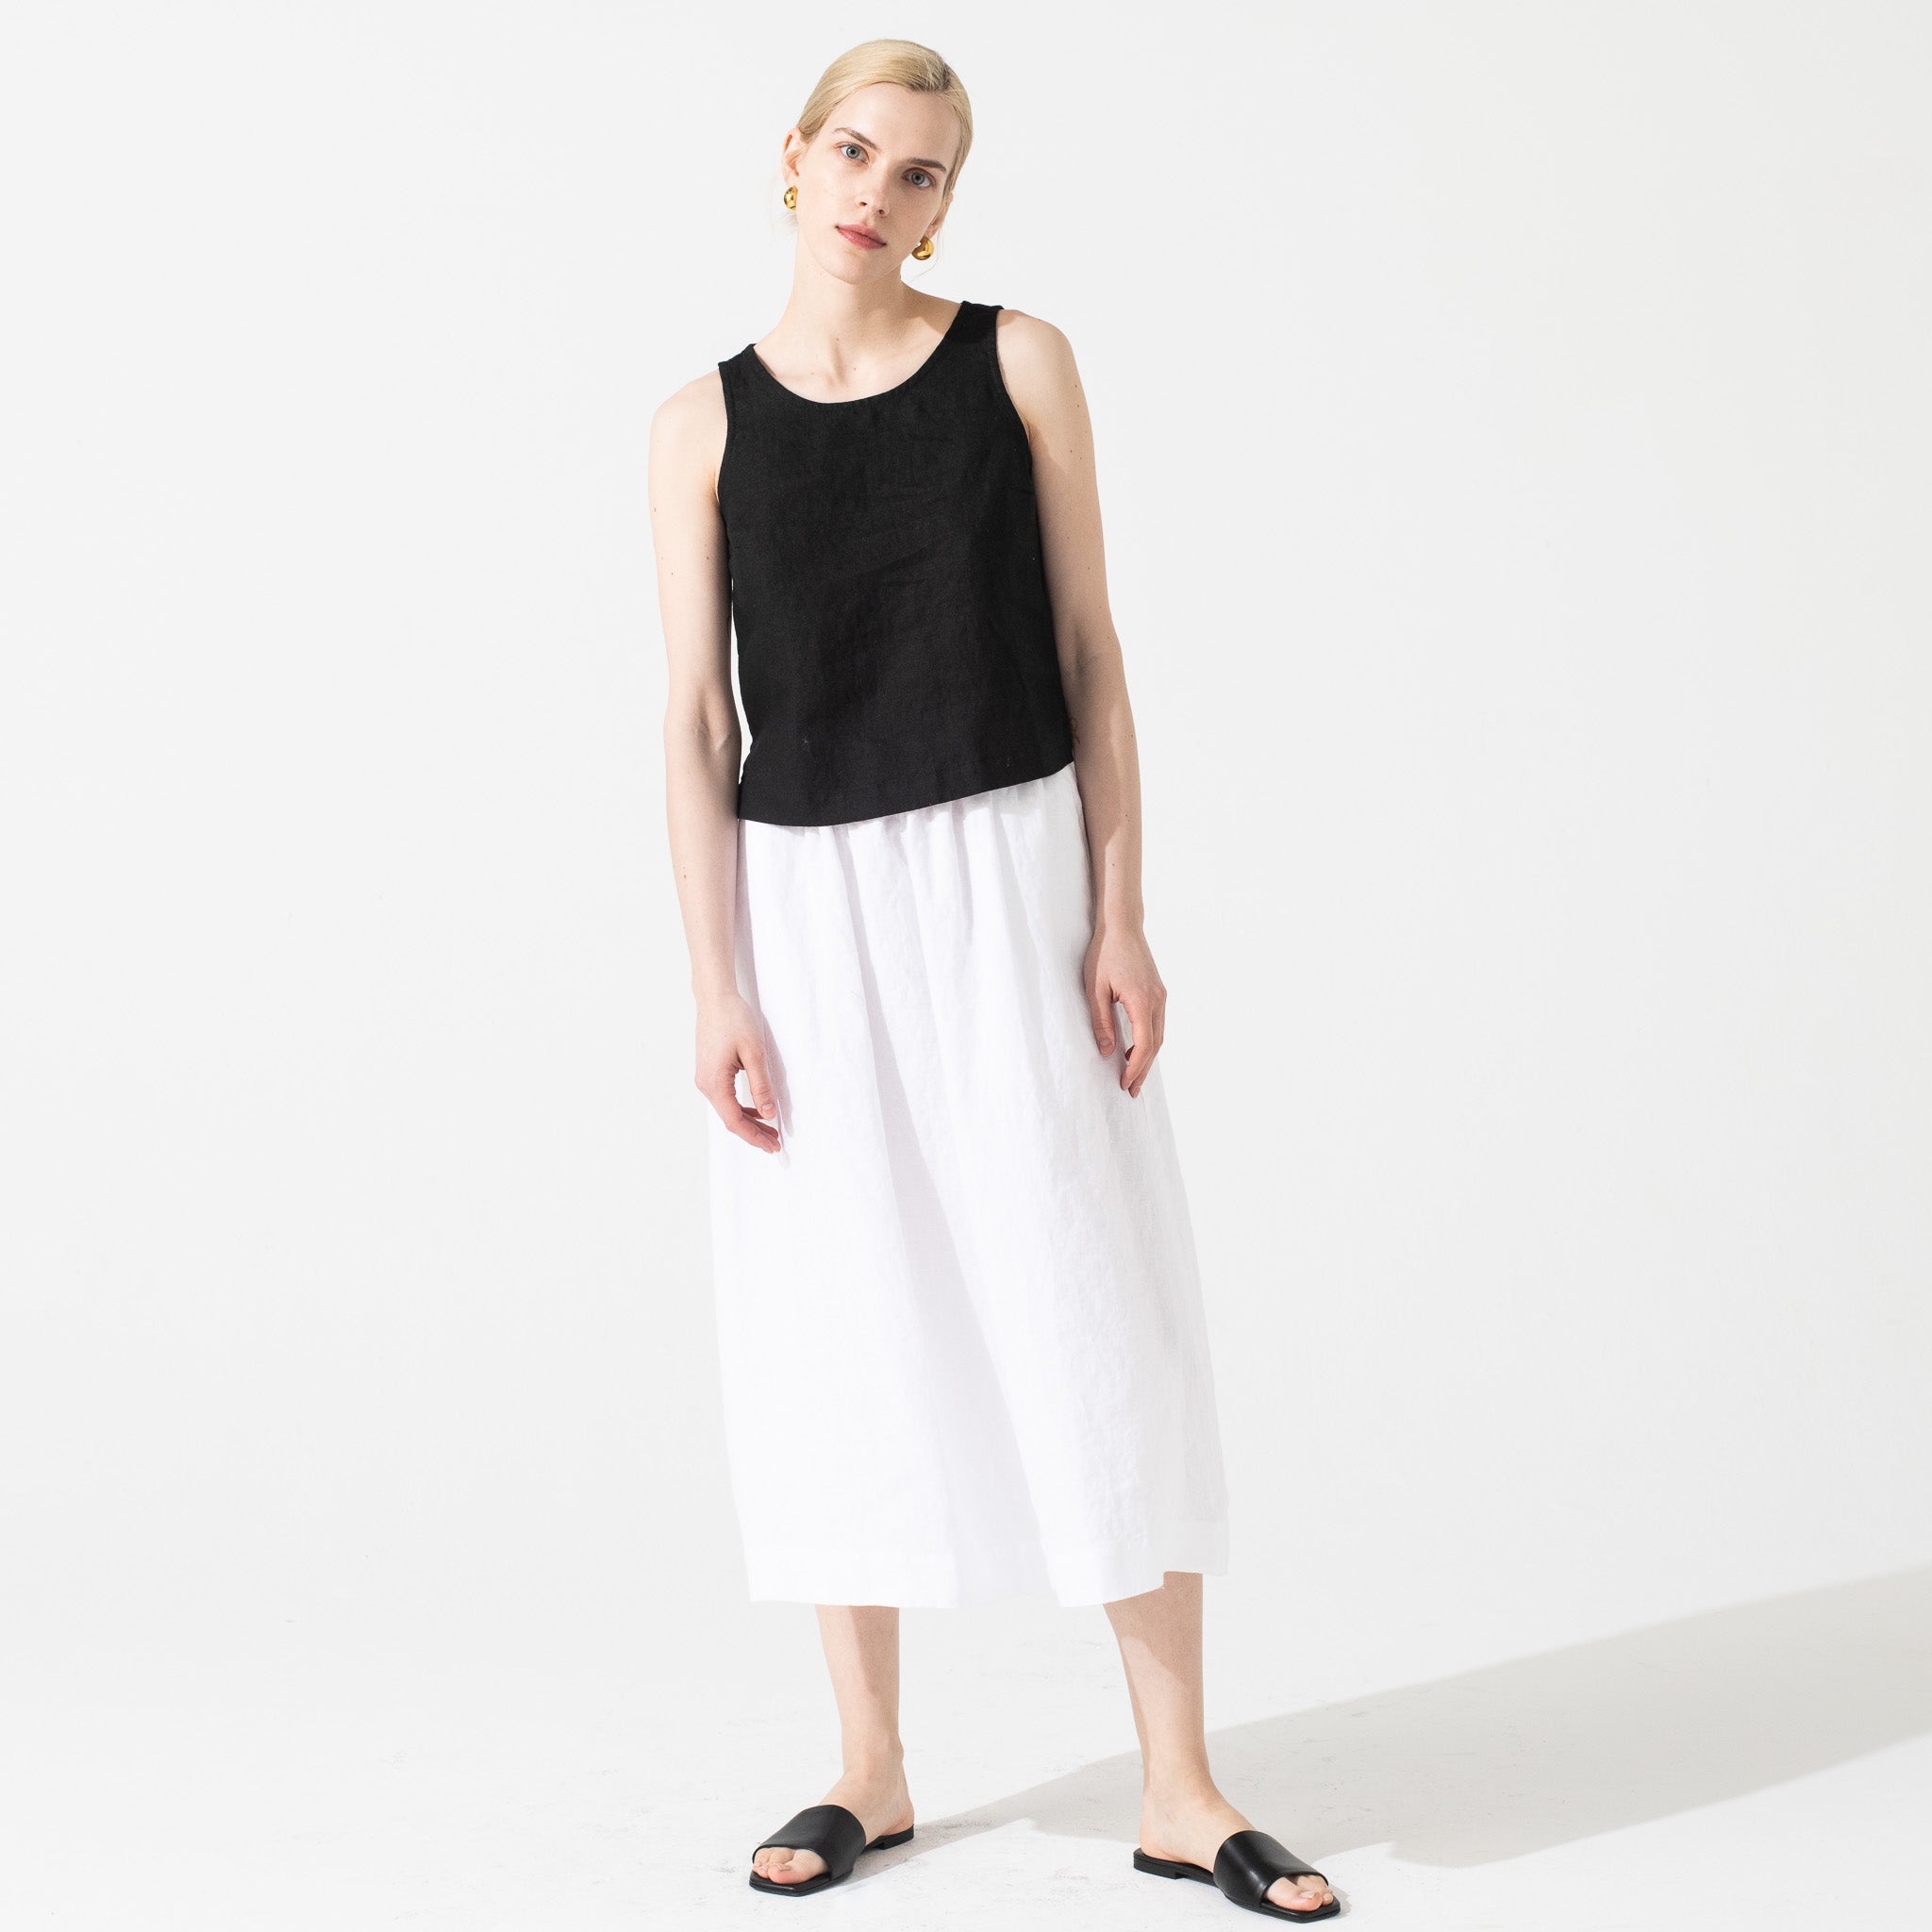 SION gathered linen skirt in White